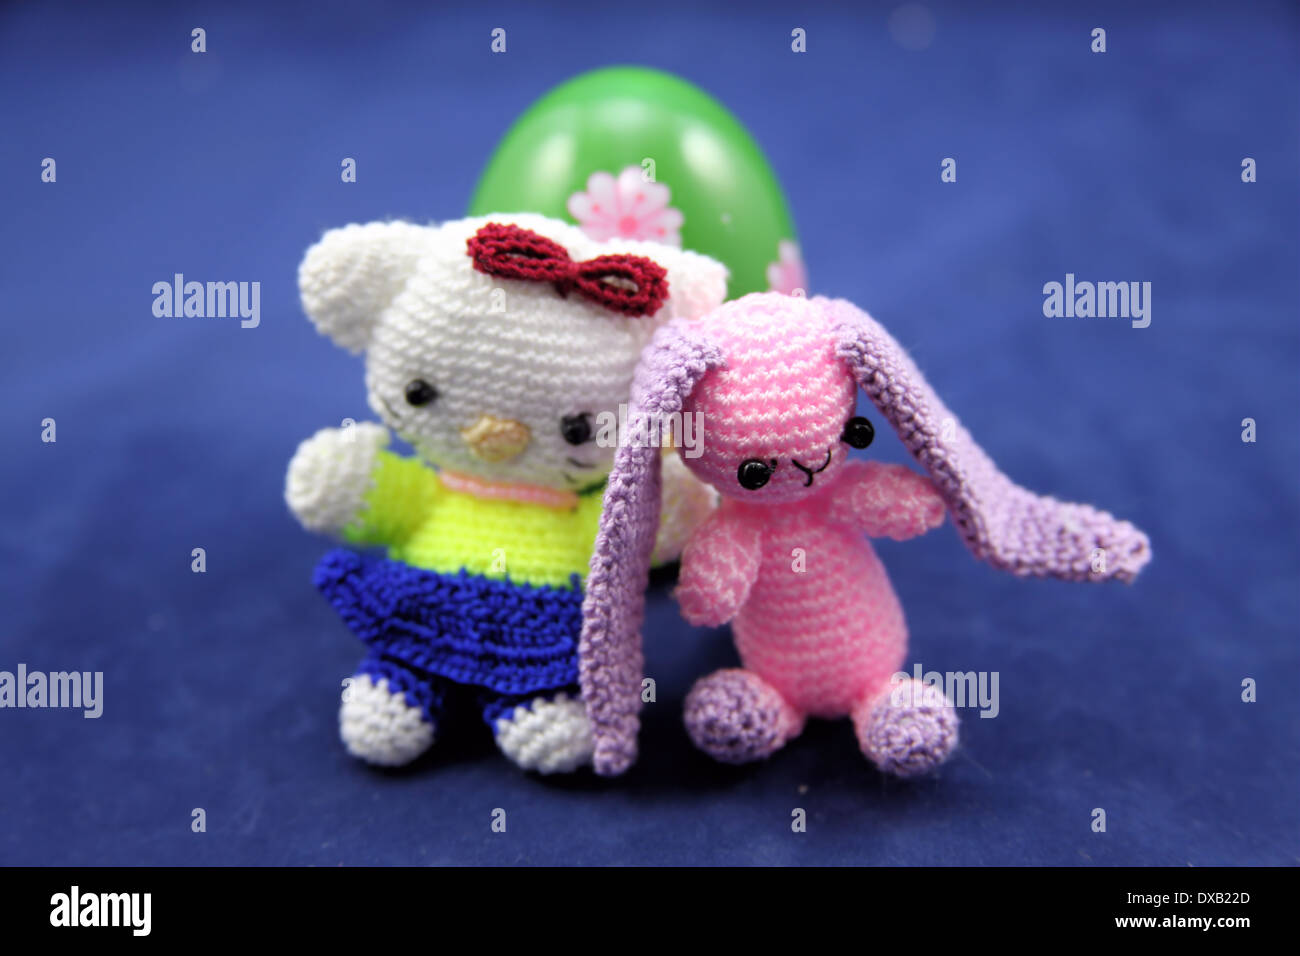 TINY ANIMALS,KNITTED,TWO INCHES HIGH Stock Photo - Alamy